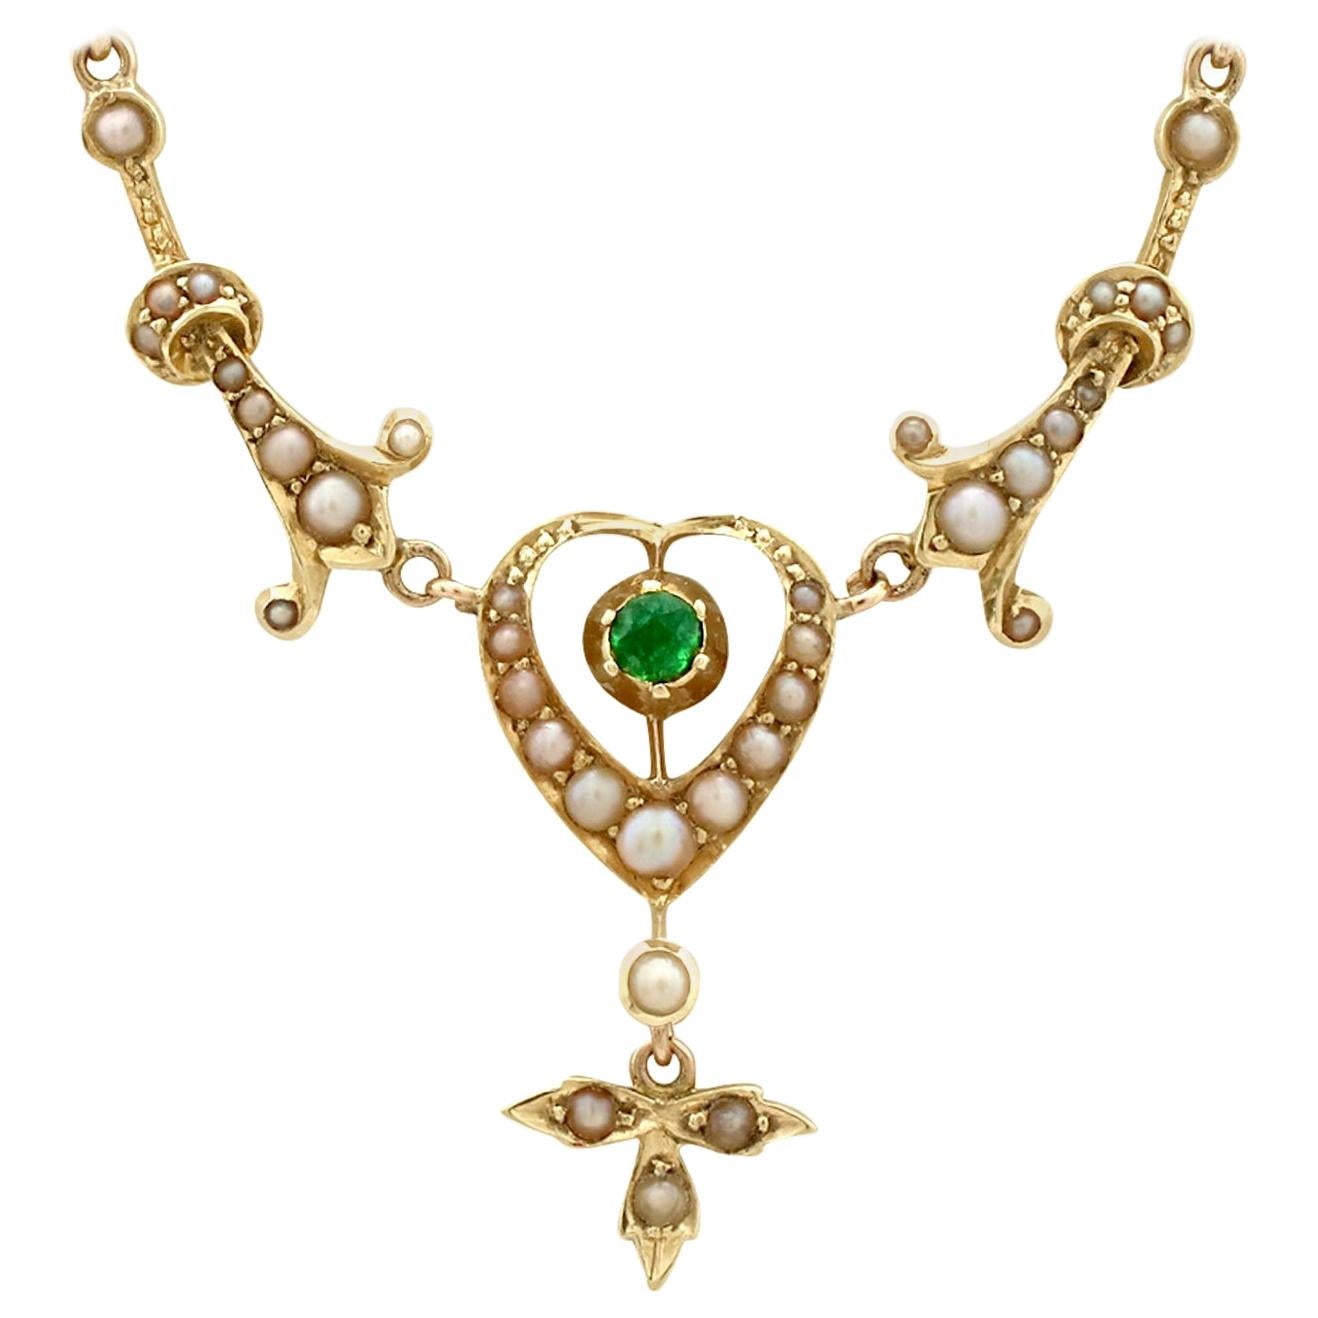 Antique 1890s Peridot and Seed Pearl Yellow Gold Necklace